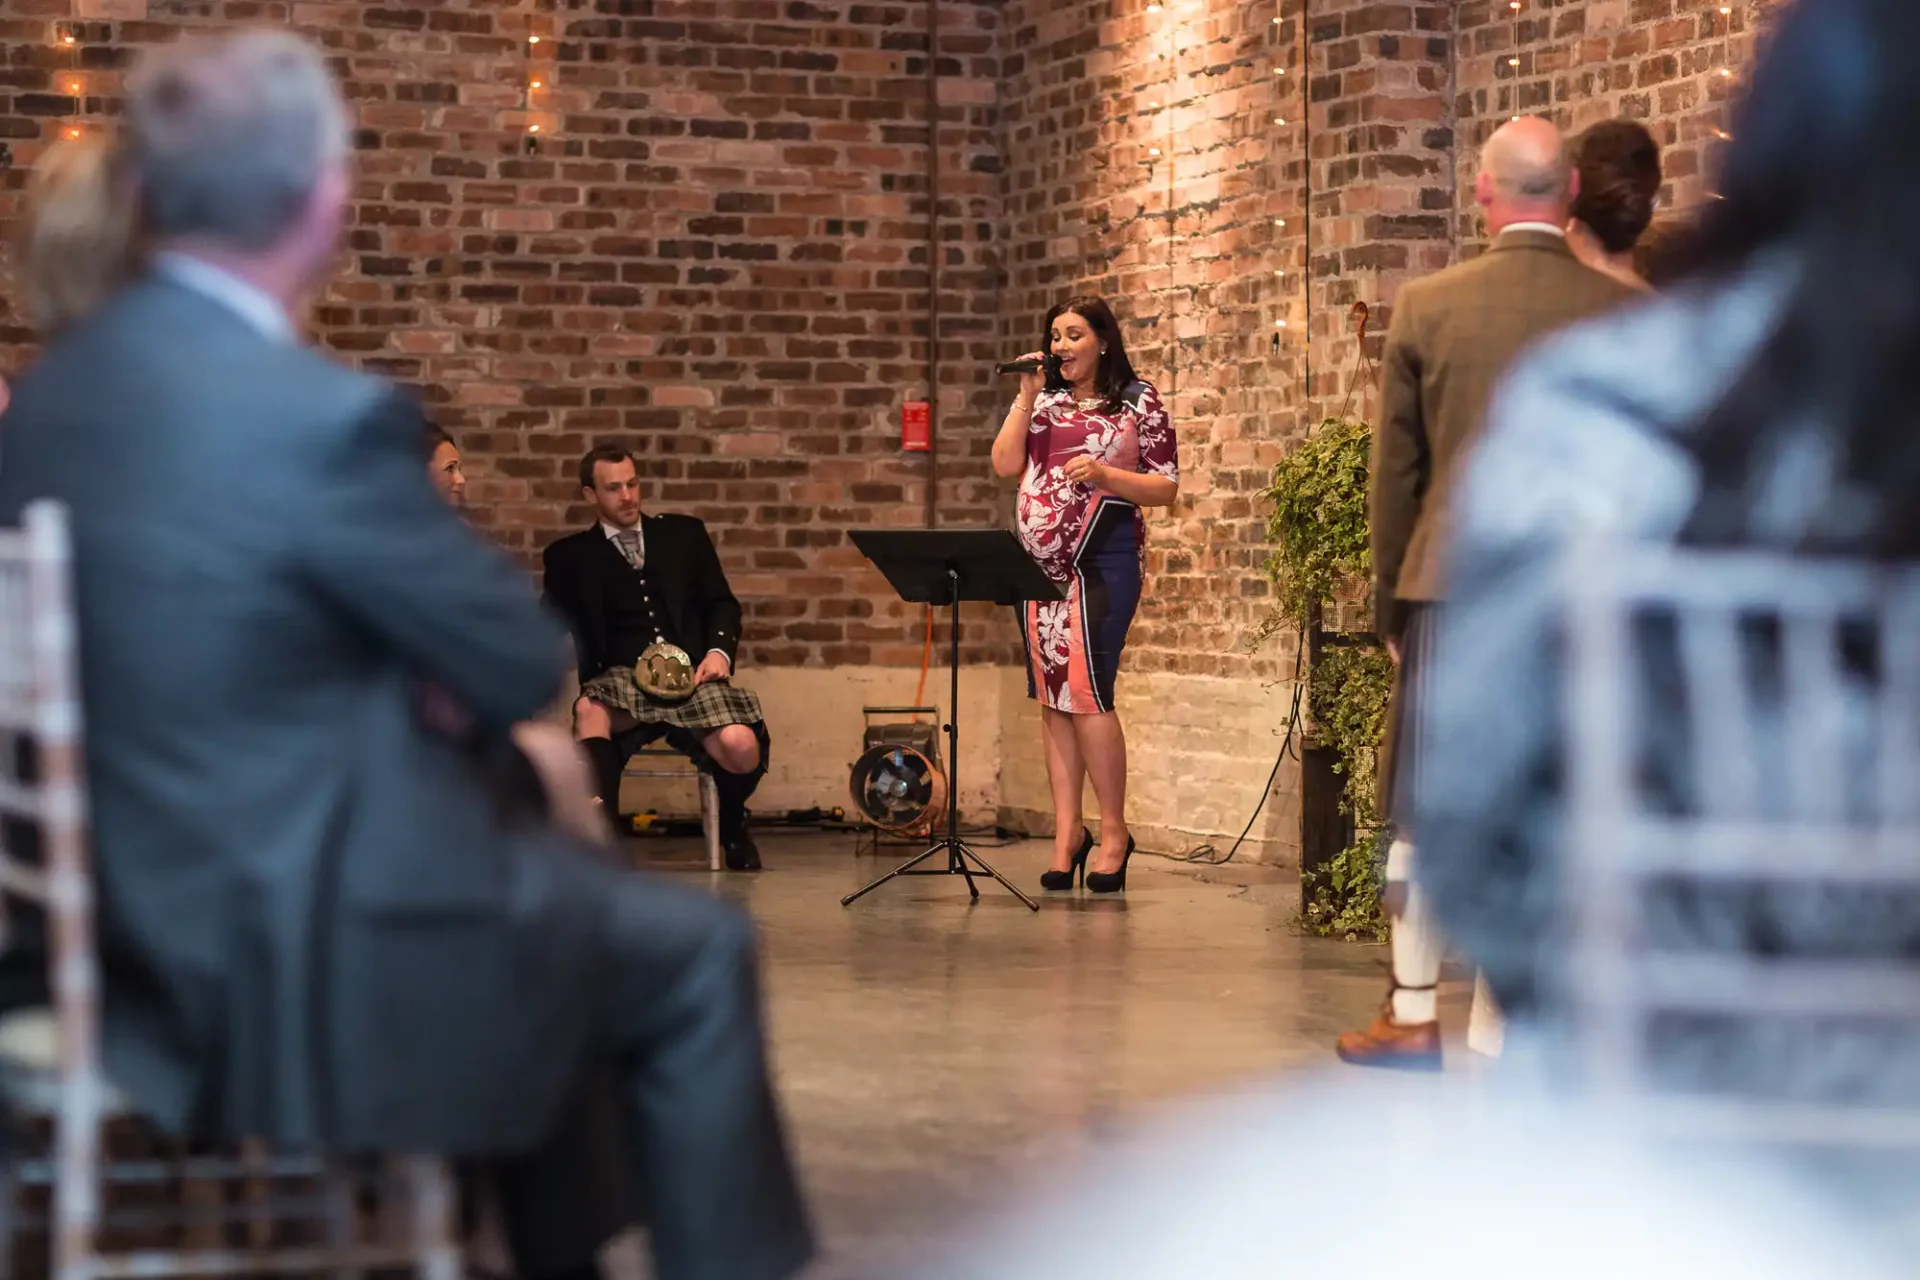 A woman gives a speech at a formal event in a brick-walled venue, with an audience listening attentively and a musician seated nearby.